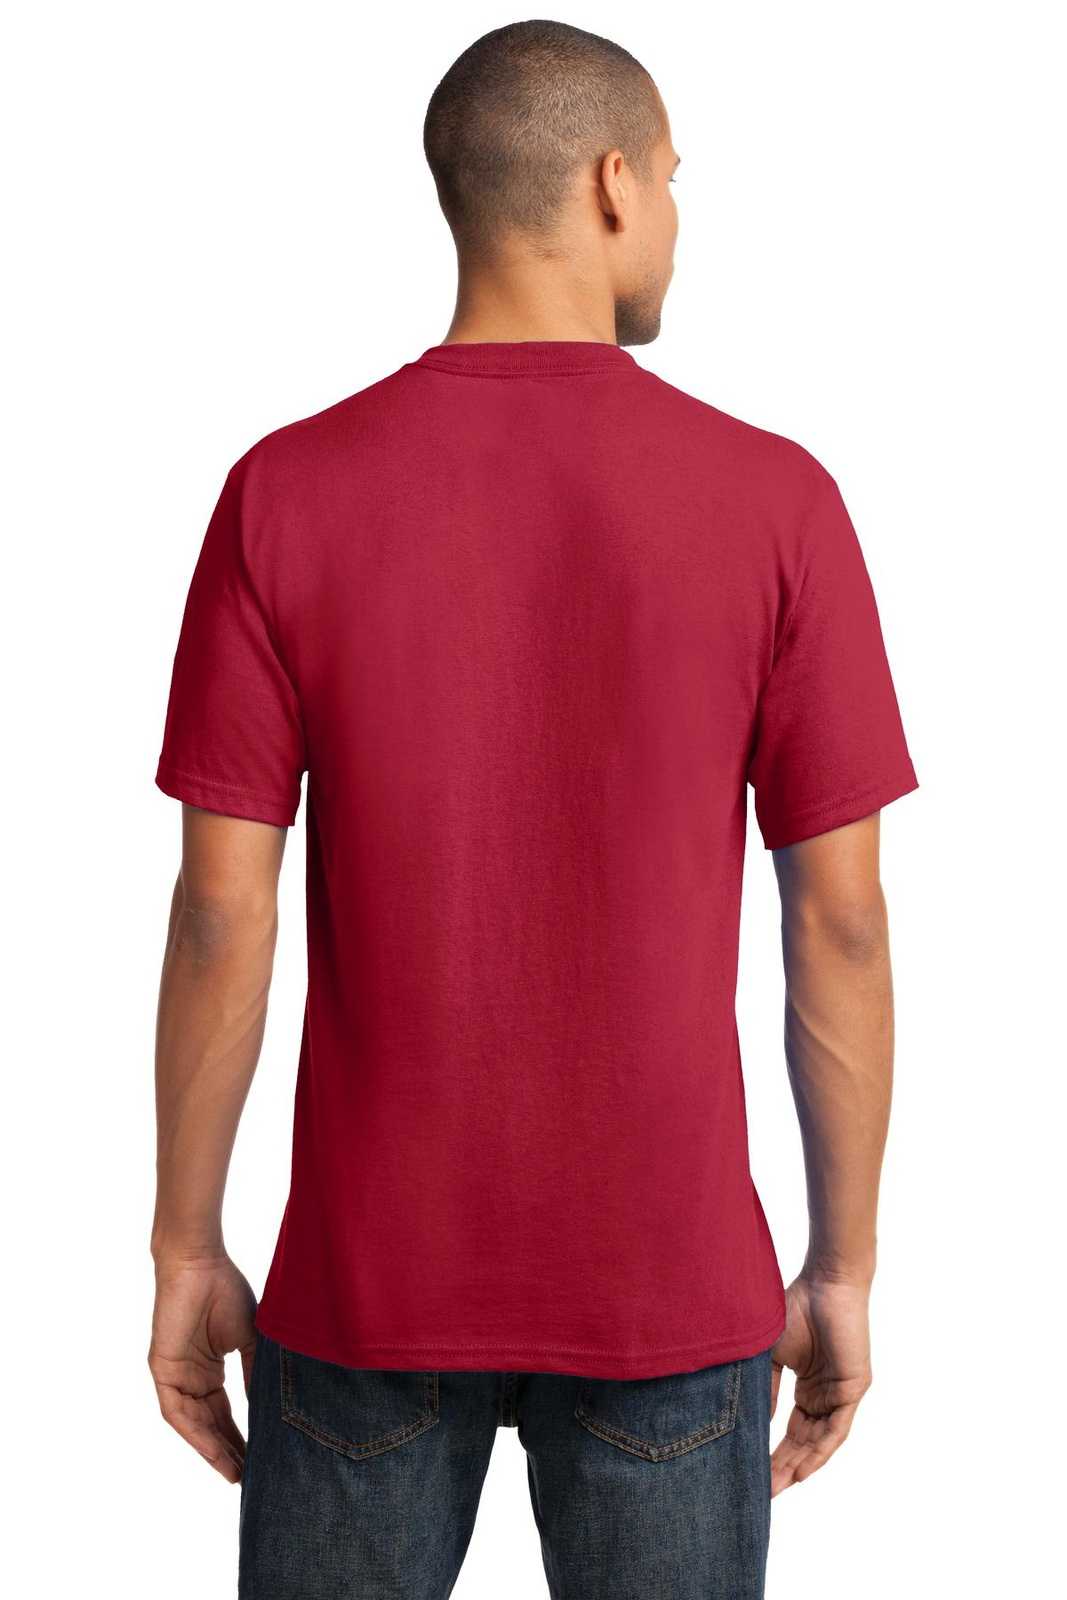 Port & Company PC54V Core Cotton V-Neck Tee - Red - HIT a Double - 1